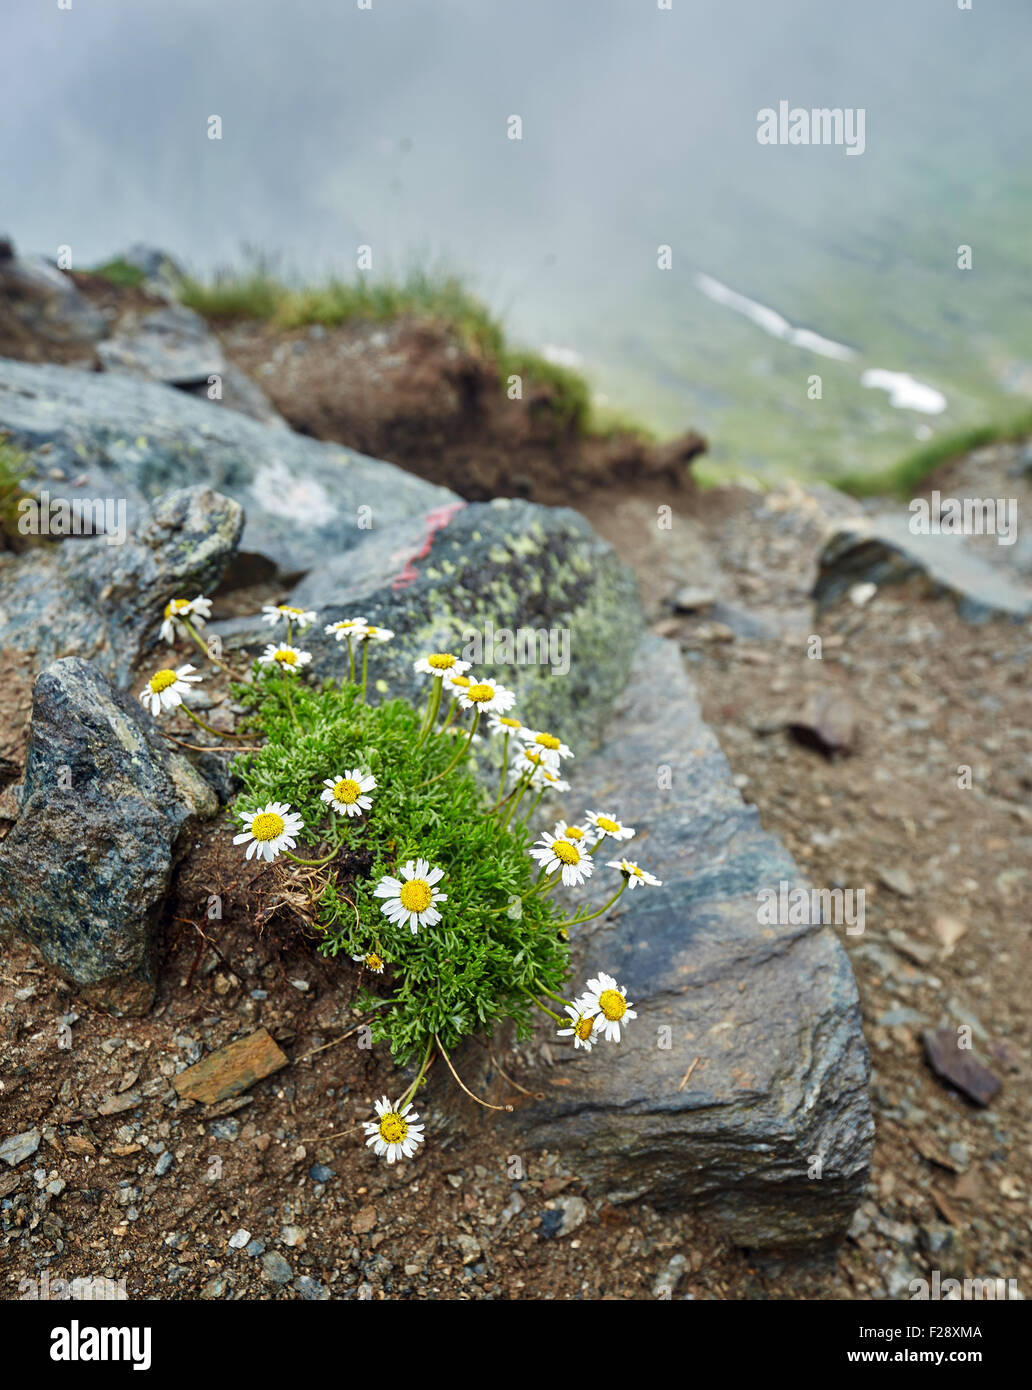 Small mountain flowers growing on rocks nearby a trail Stock Photo